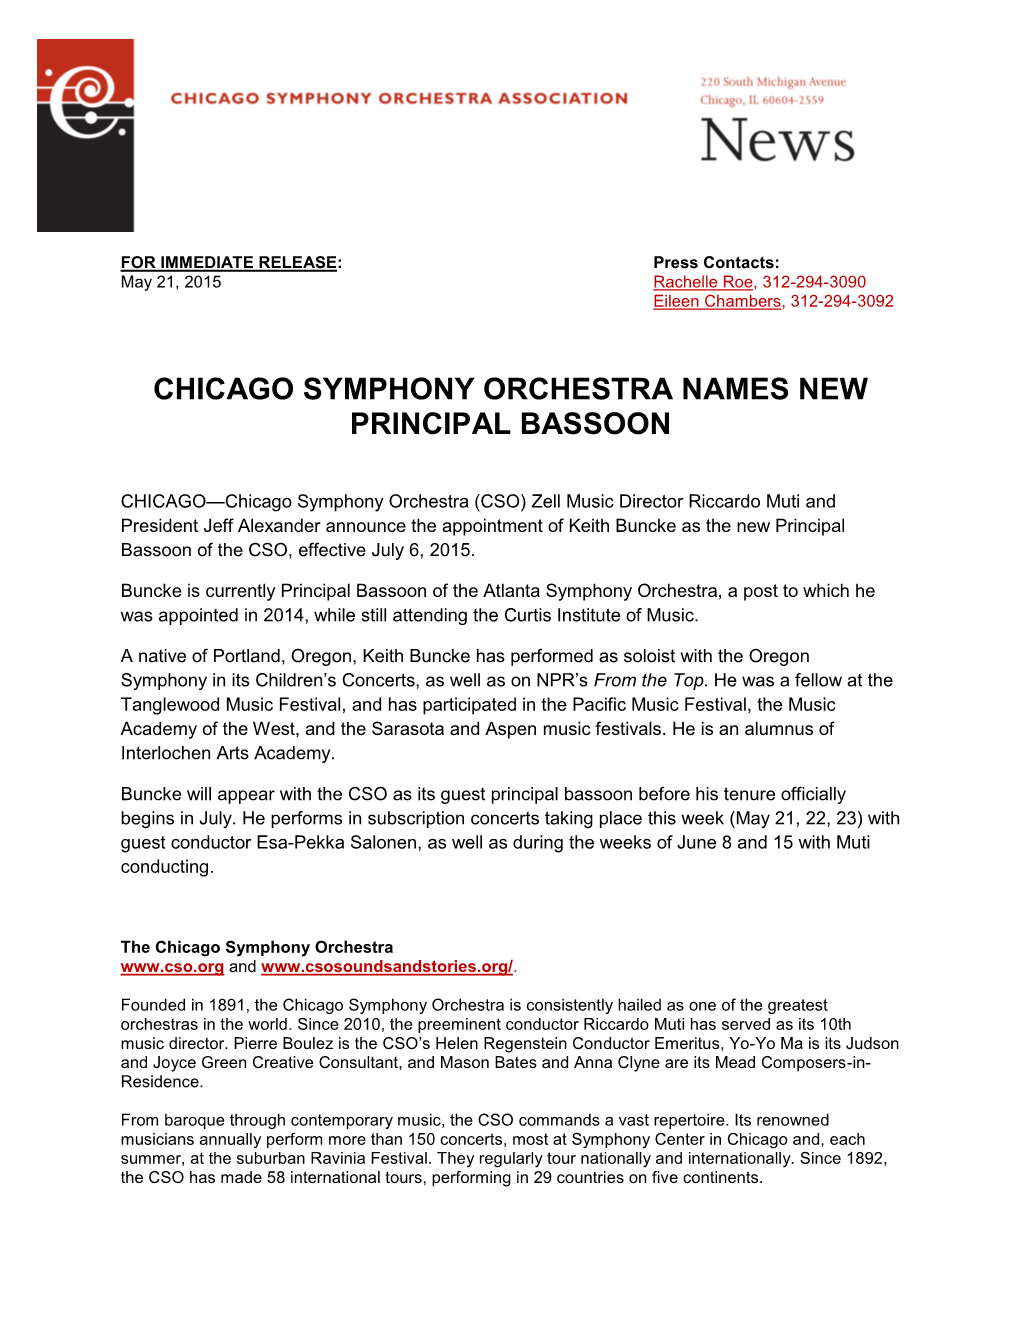 Chicago Symphony Orchestra Names New Principal Bassoon